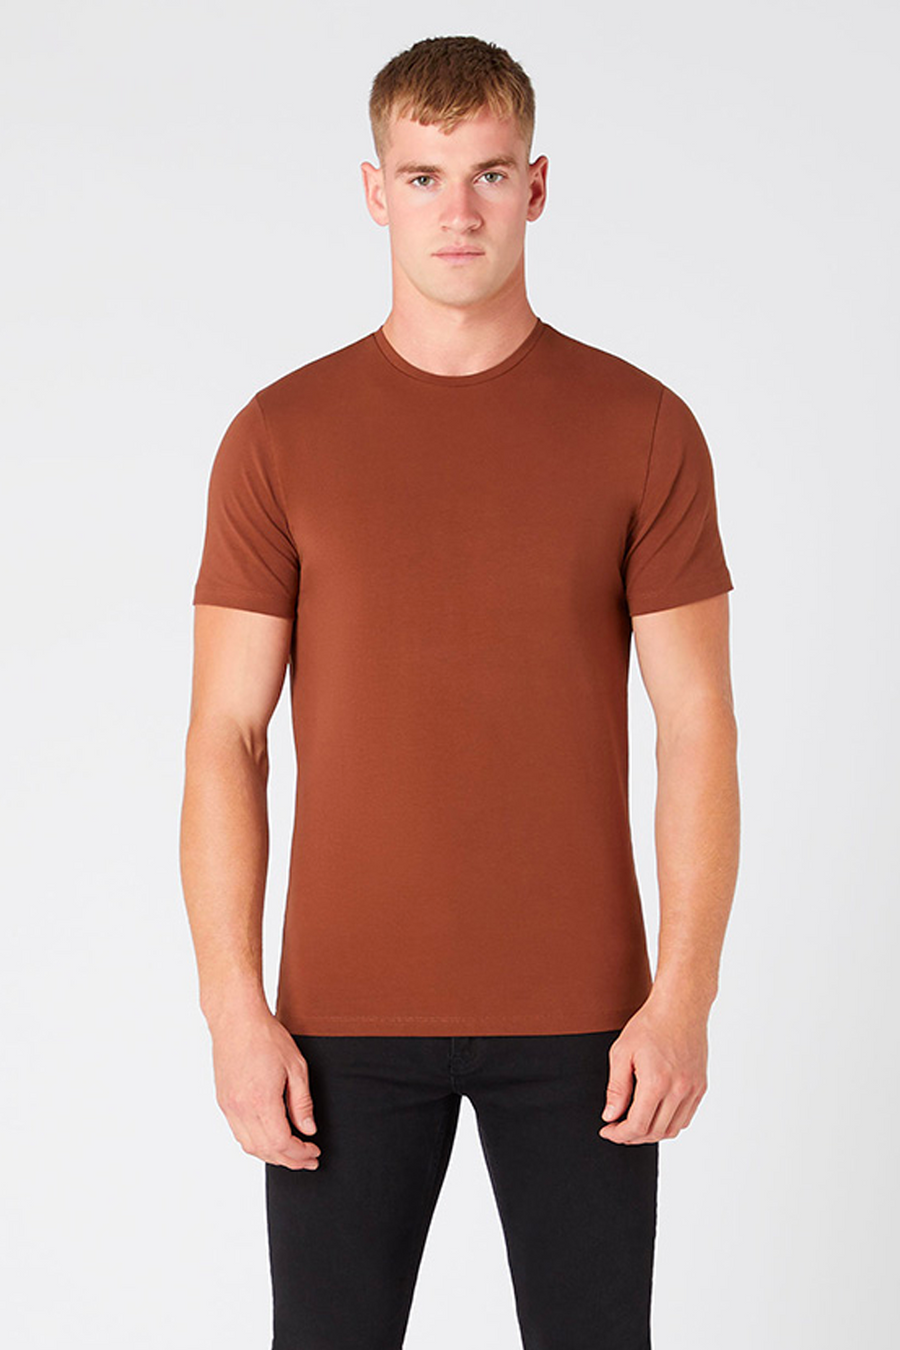 Buy the Remus Uomo Basic Round Neck T-Shirt Brown at Intro. Spend £50 for free UK delivery. Official stockists. We ship worldwide.